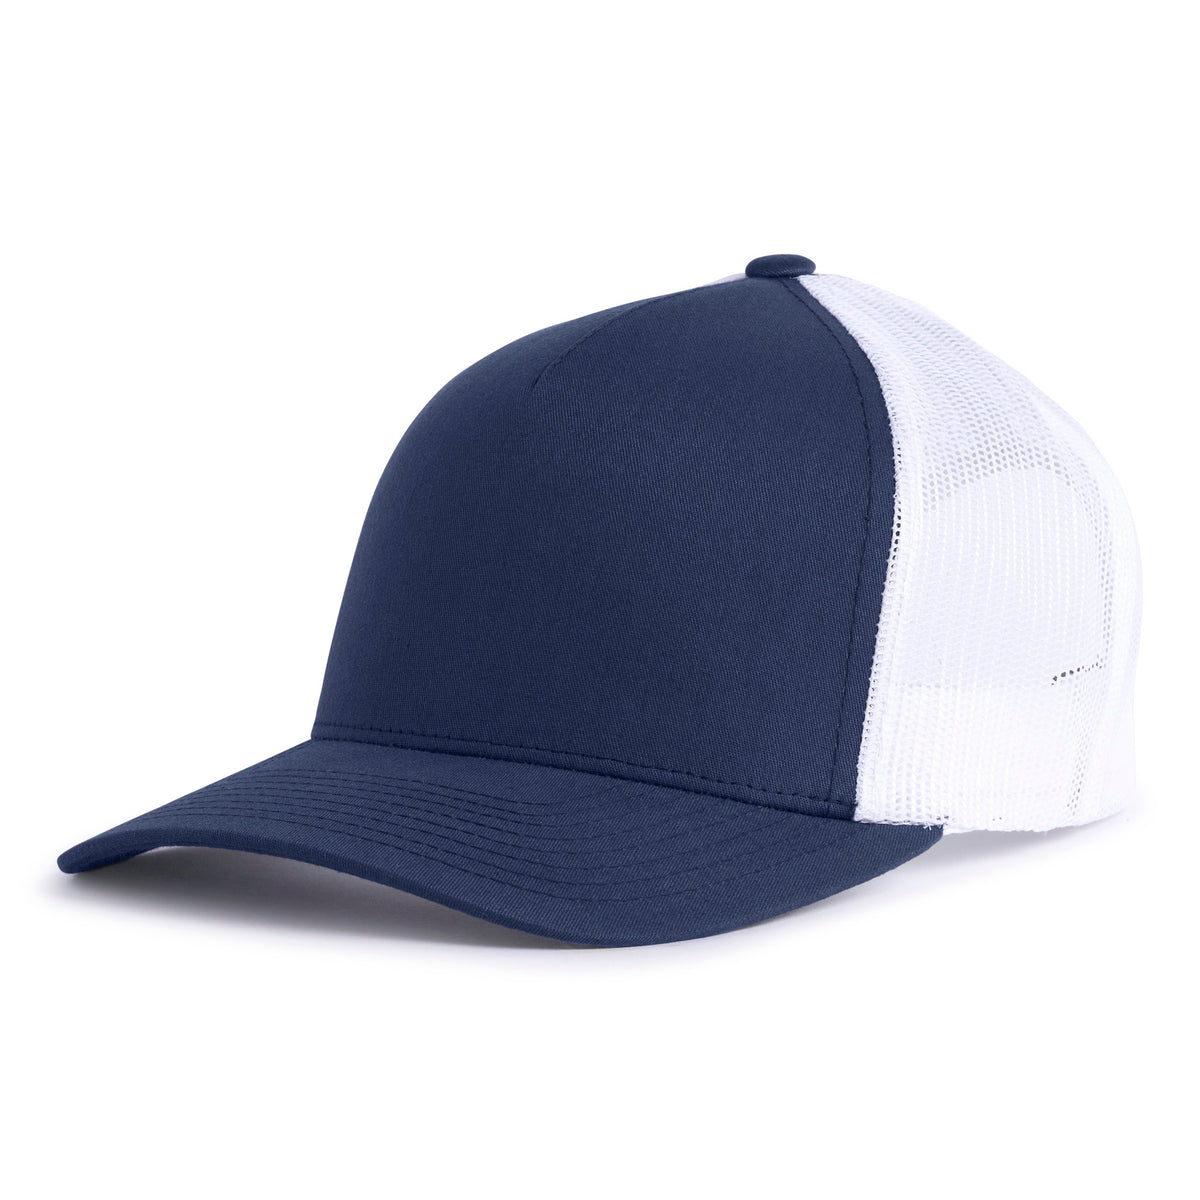 Navy blue trucker hat with a curved bill, 5-panels, structured mid-high crown, white mesh back, and a snapback closure from Tailgate Hats.